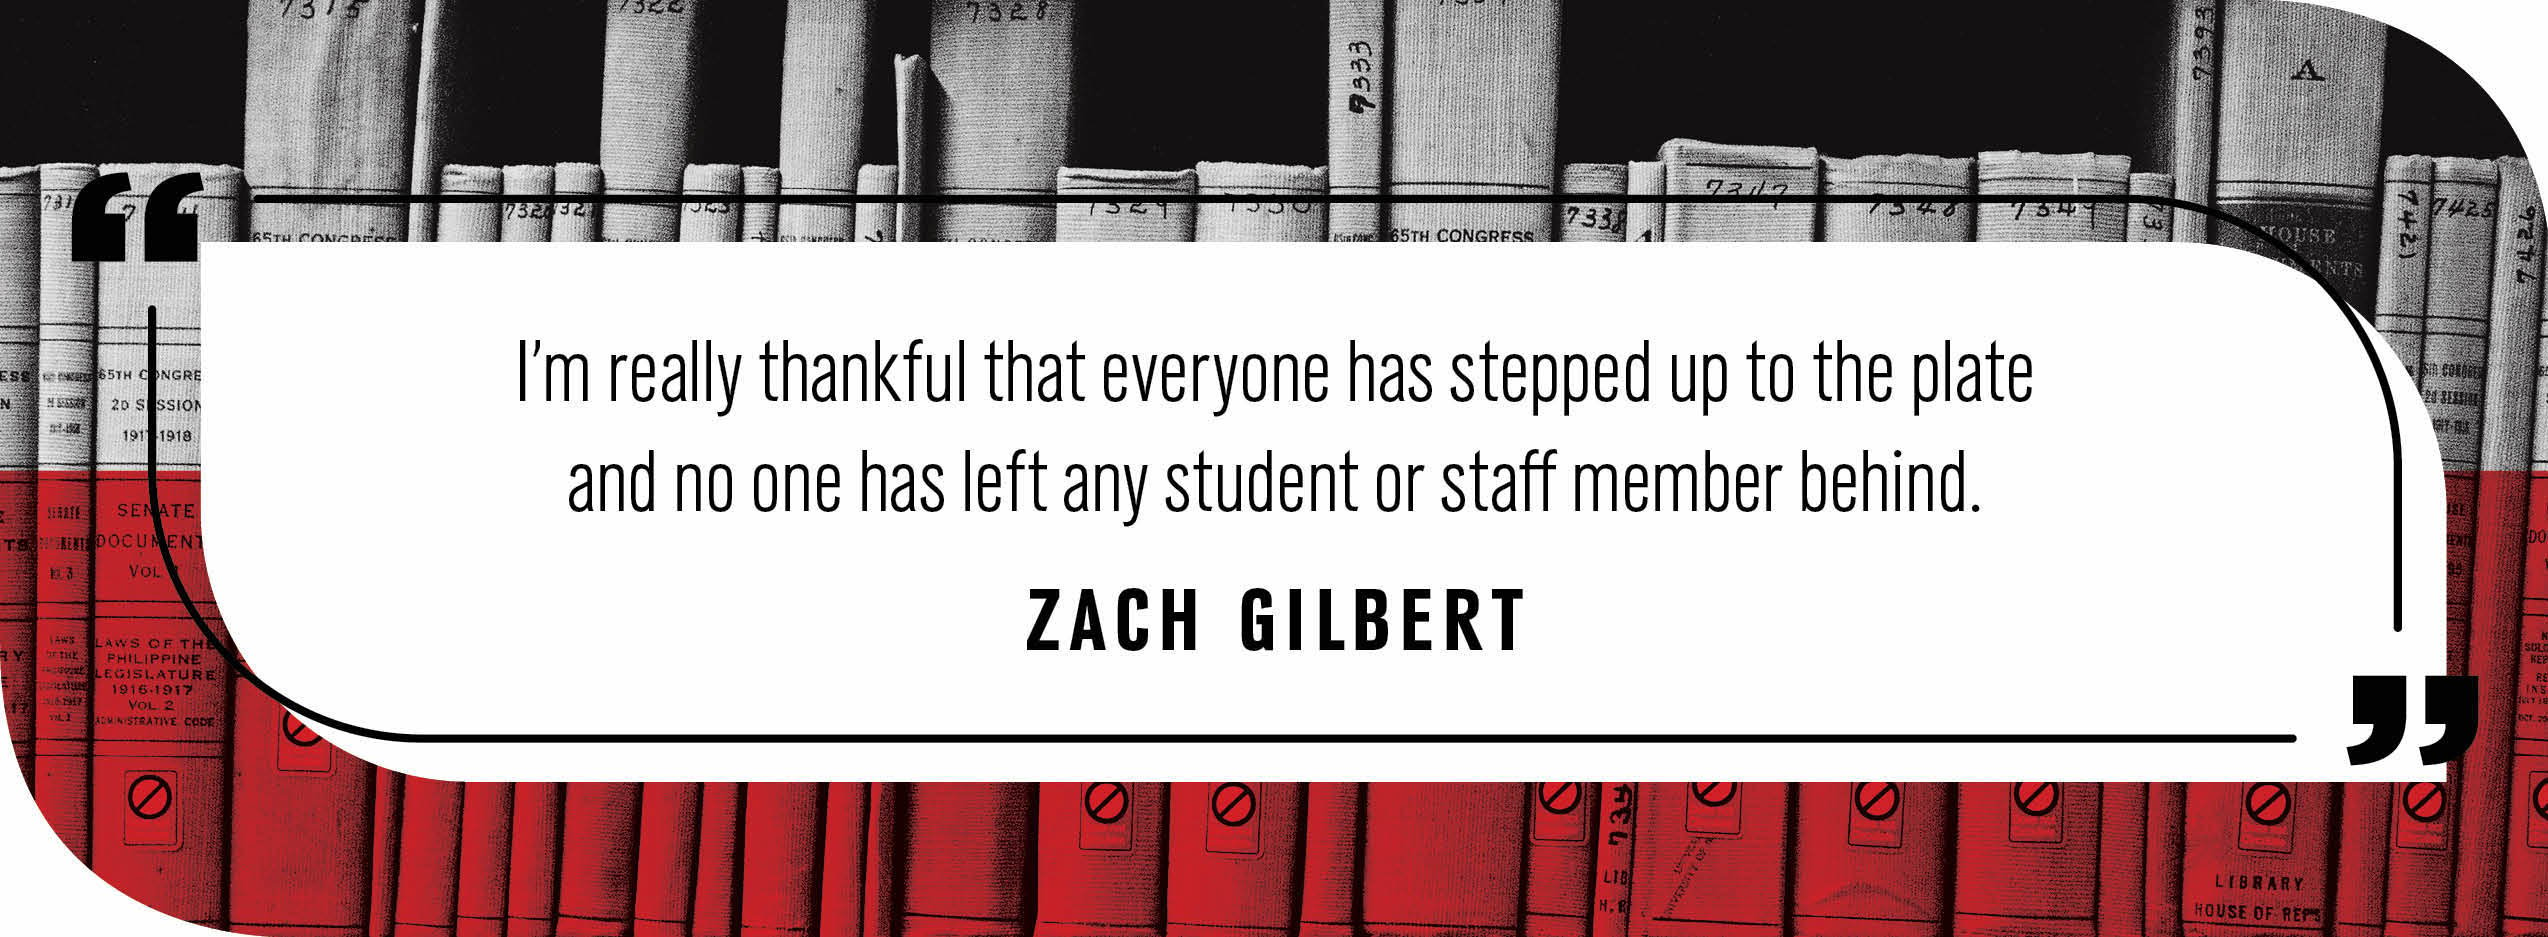 Quote by Zach Gilbert: "I’m really thankful that everyone has stepped up to the plate and no one has left any student or staff member behind."